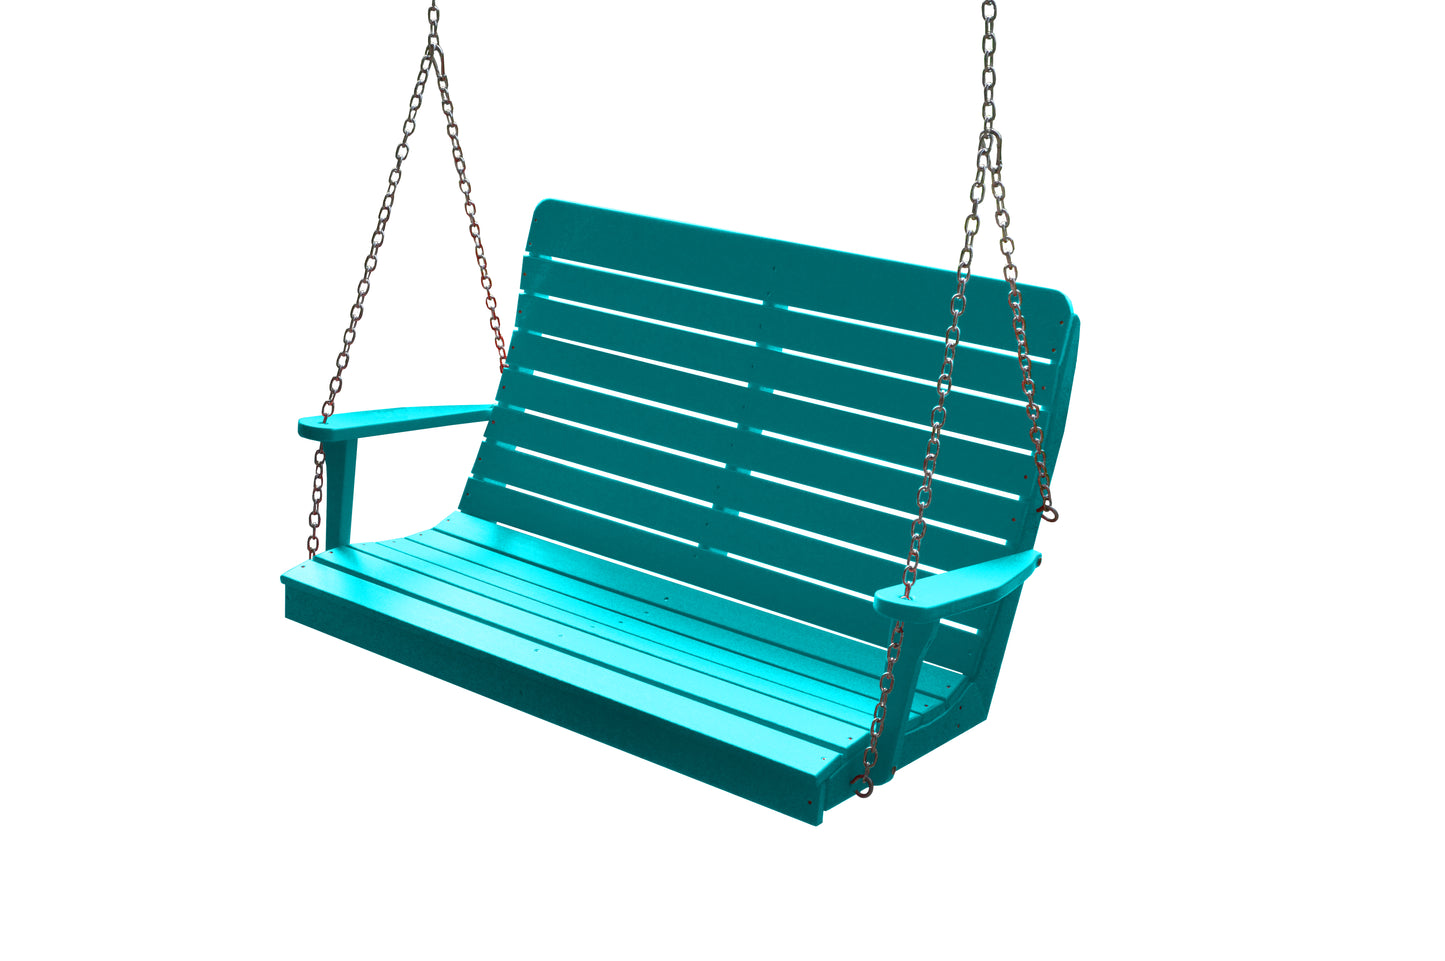 Winston Recycled Plastic Porch Swing